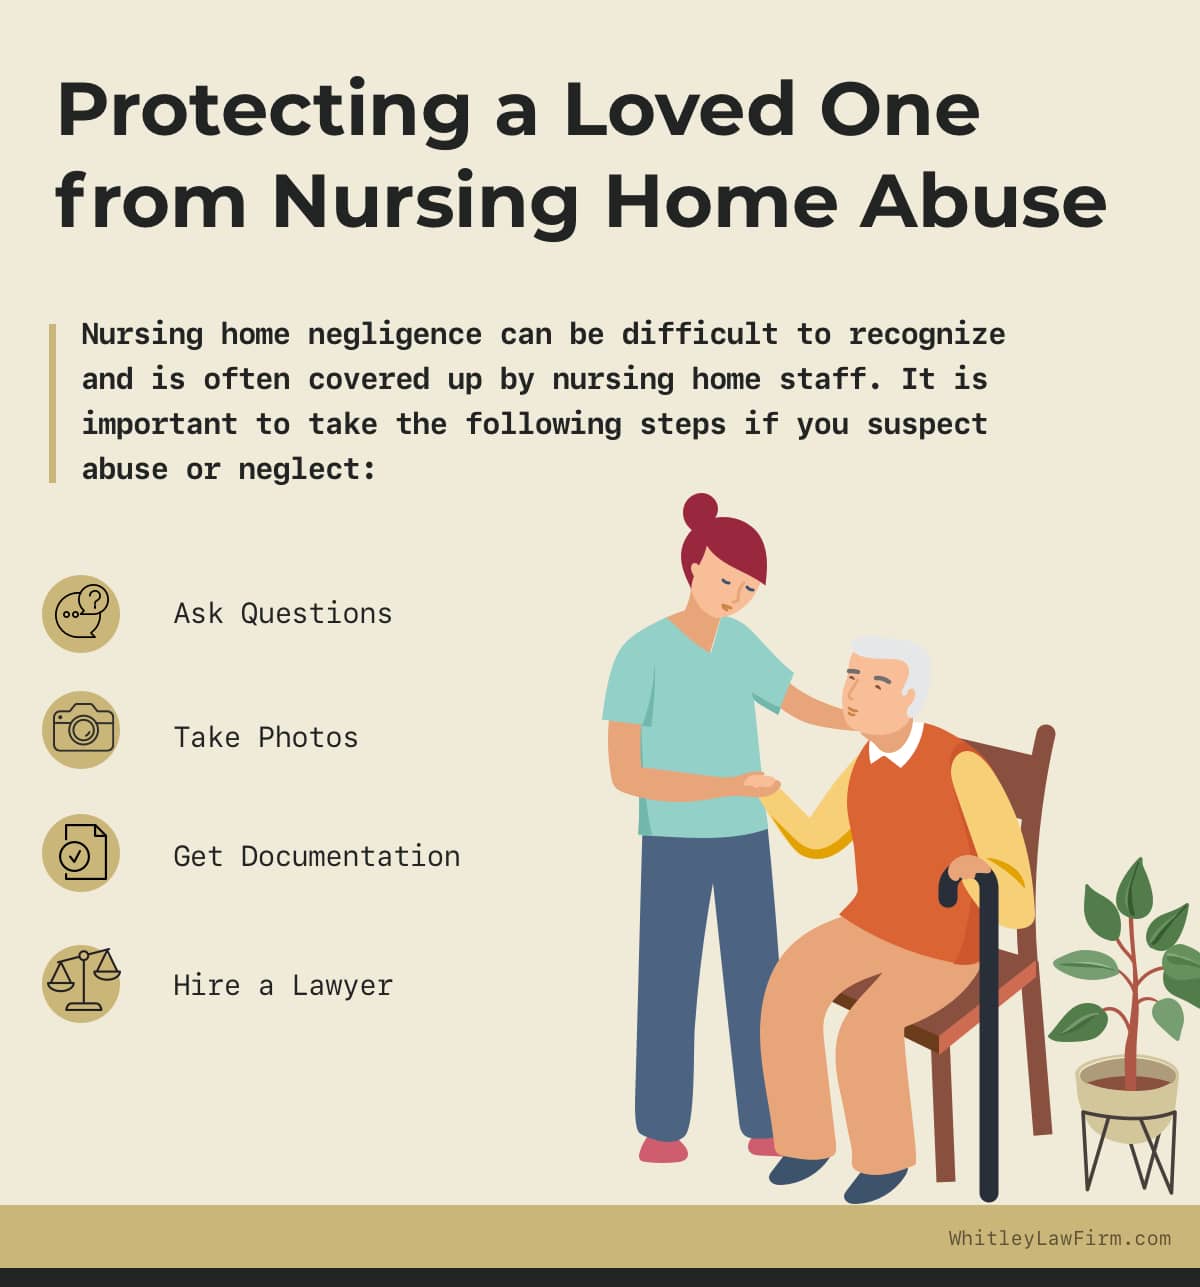 Protecting a Loved One from Nursing Home Abuse | Whitley Law Firm